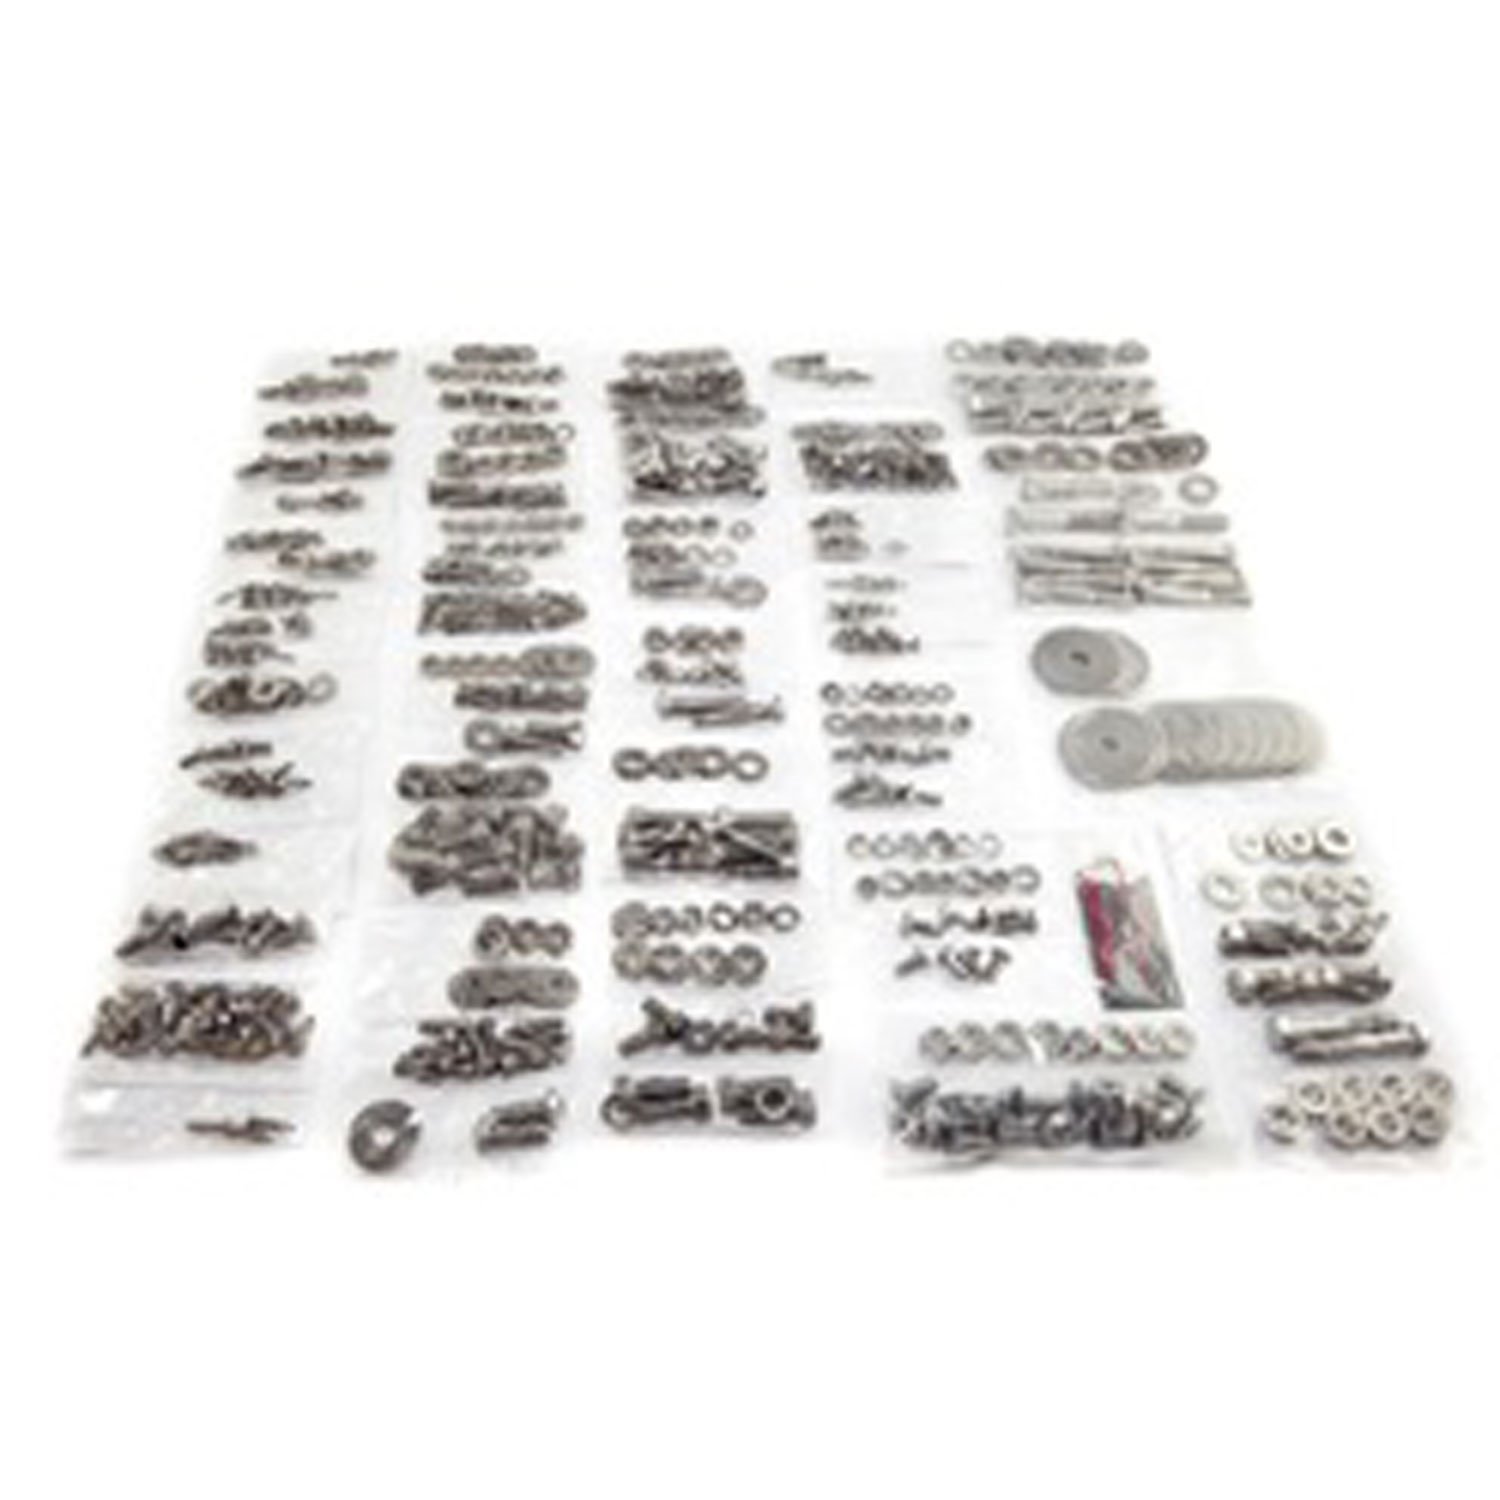 This 754 piece stainless steel body fastener kit from Omix-ADA gives you all the fasteners to rebuil